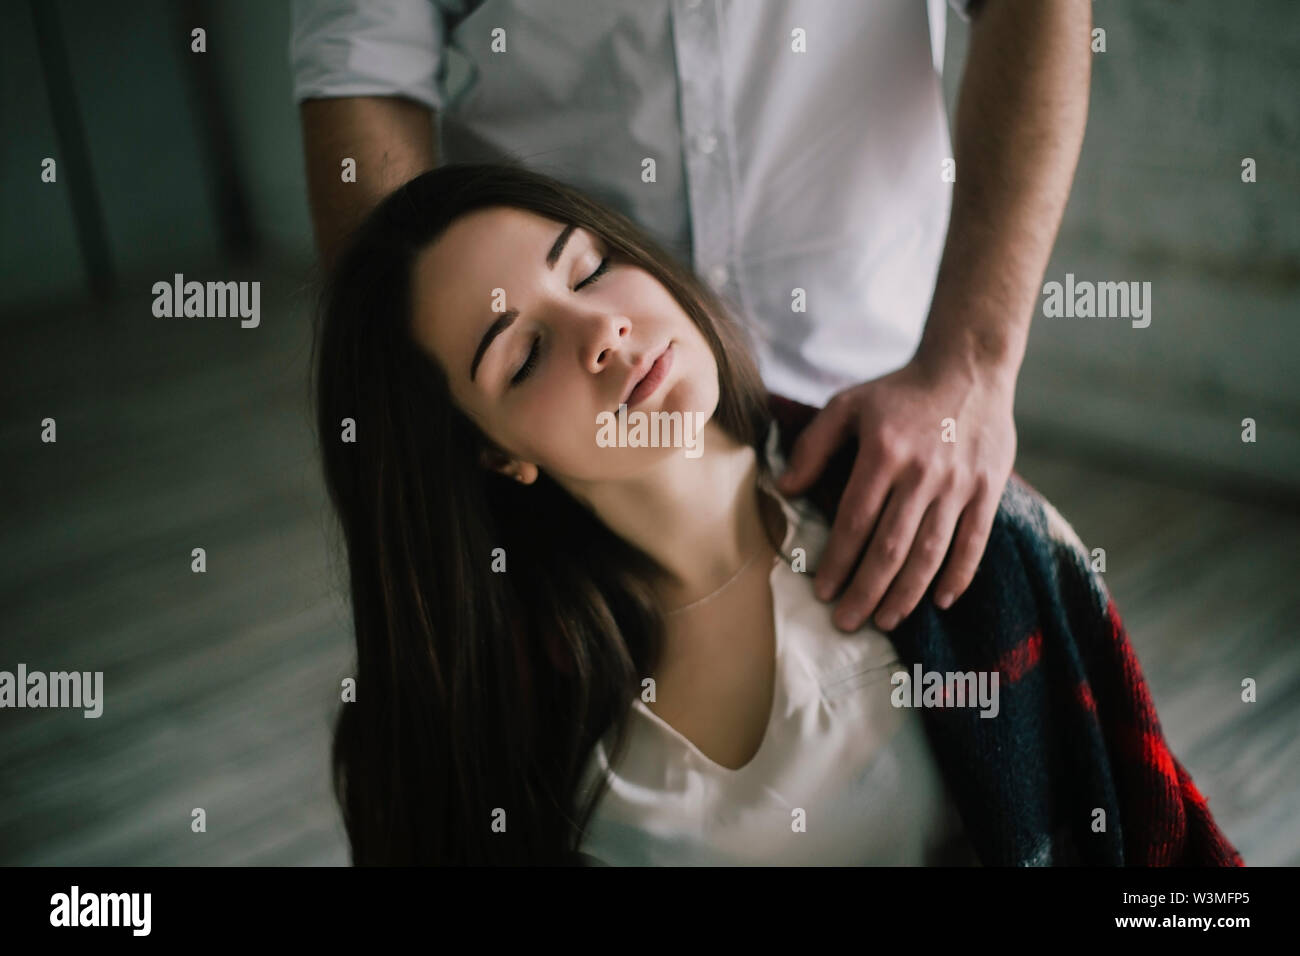 Woman with her eyes closed and man's hands on her shoulders Stock Photo